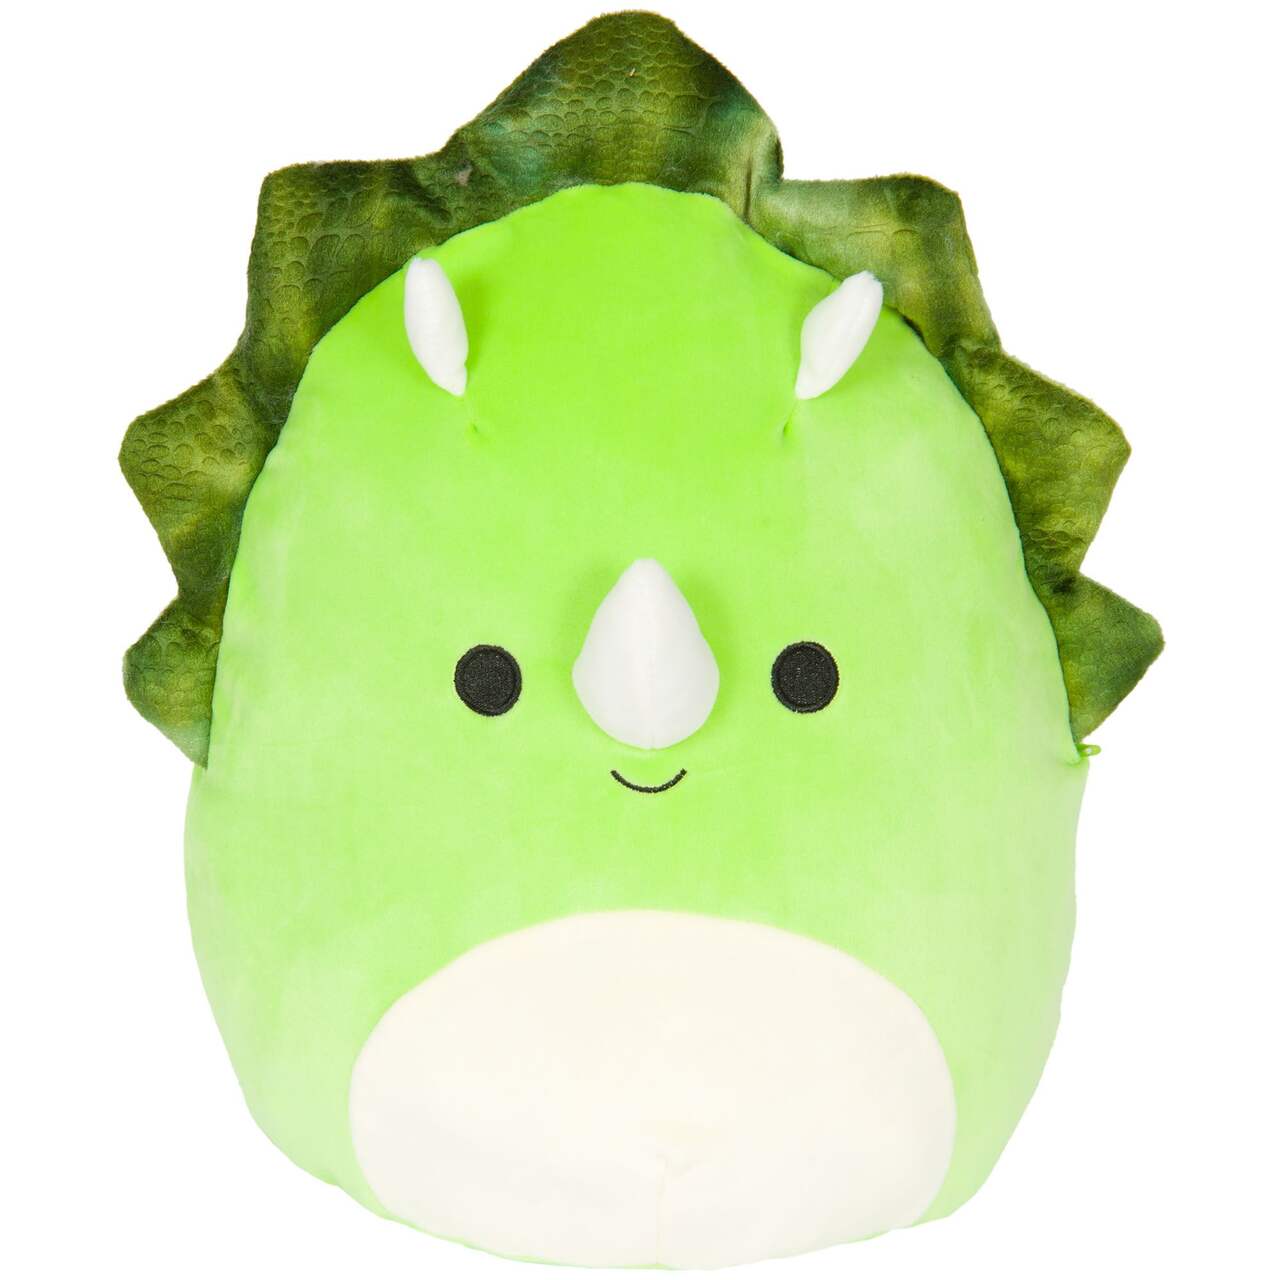 Squishmallow Plush Toy, Assorted, 12-in, Age 2+